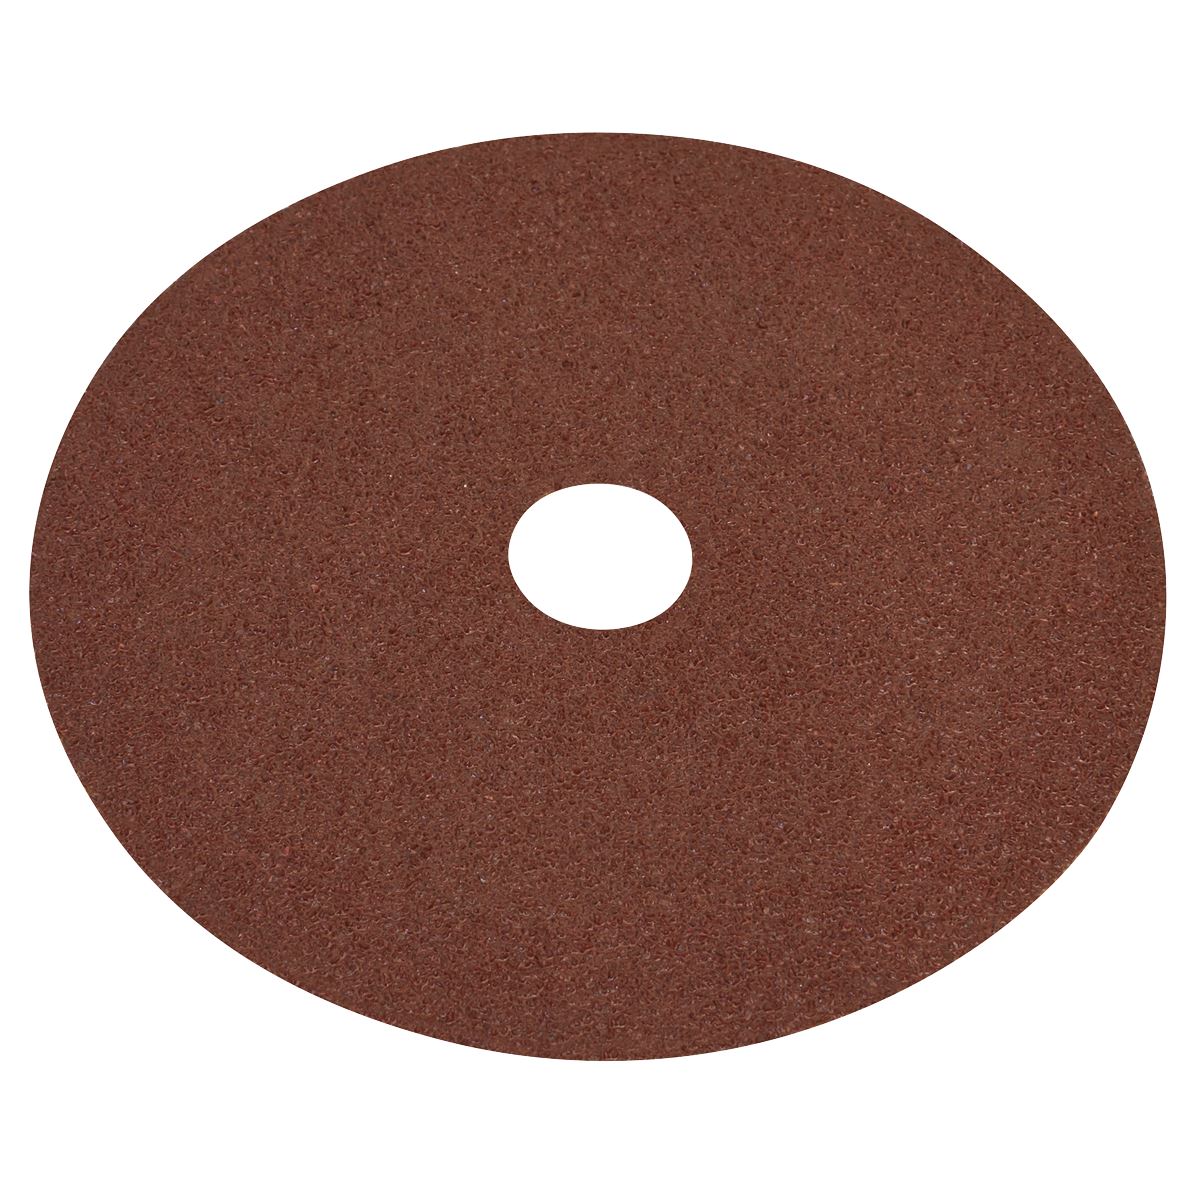 Worksafe by Sealey Fibre Backed Disc Ø100mm - 40Grit Pack of 25